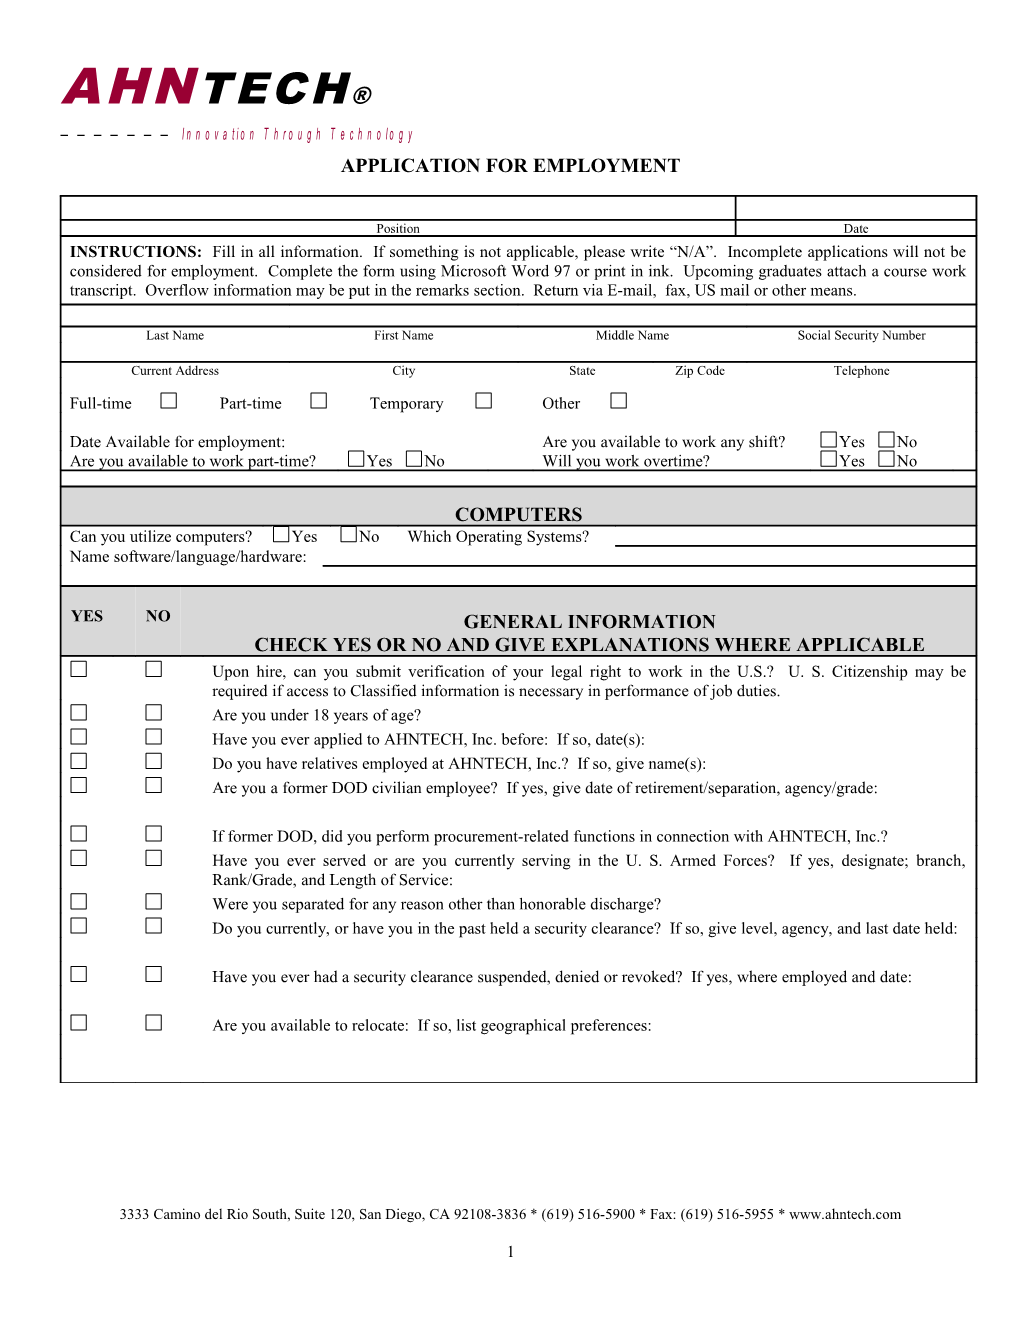 Application for Employment s91